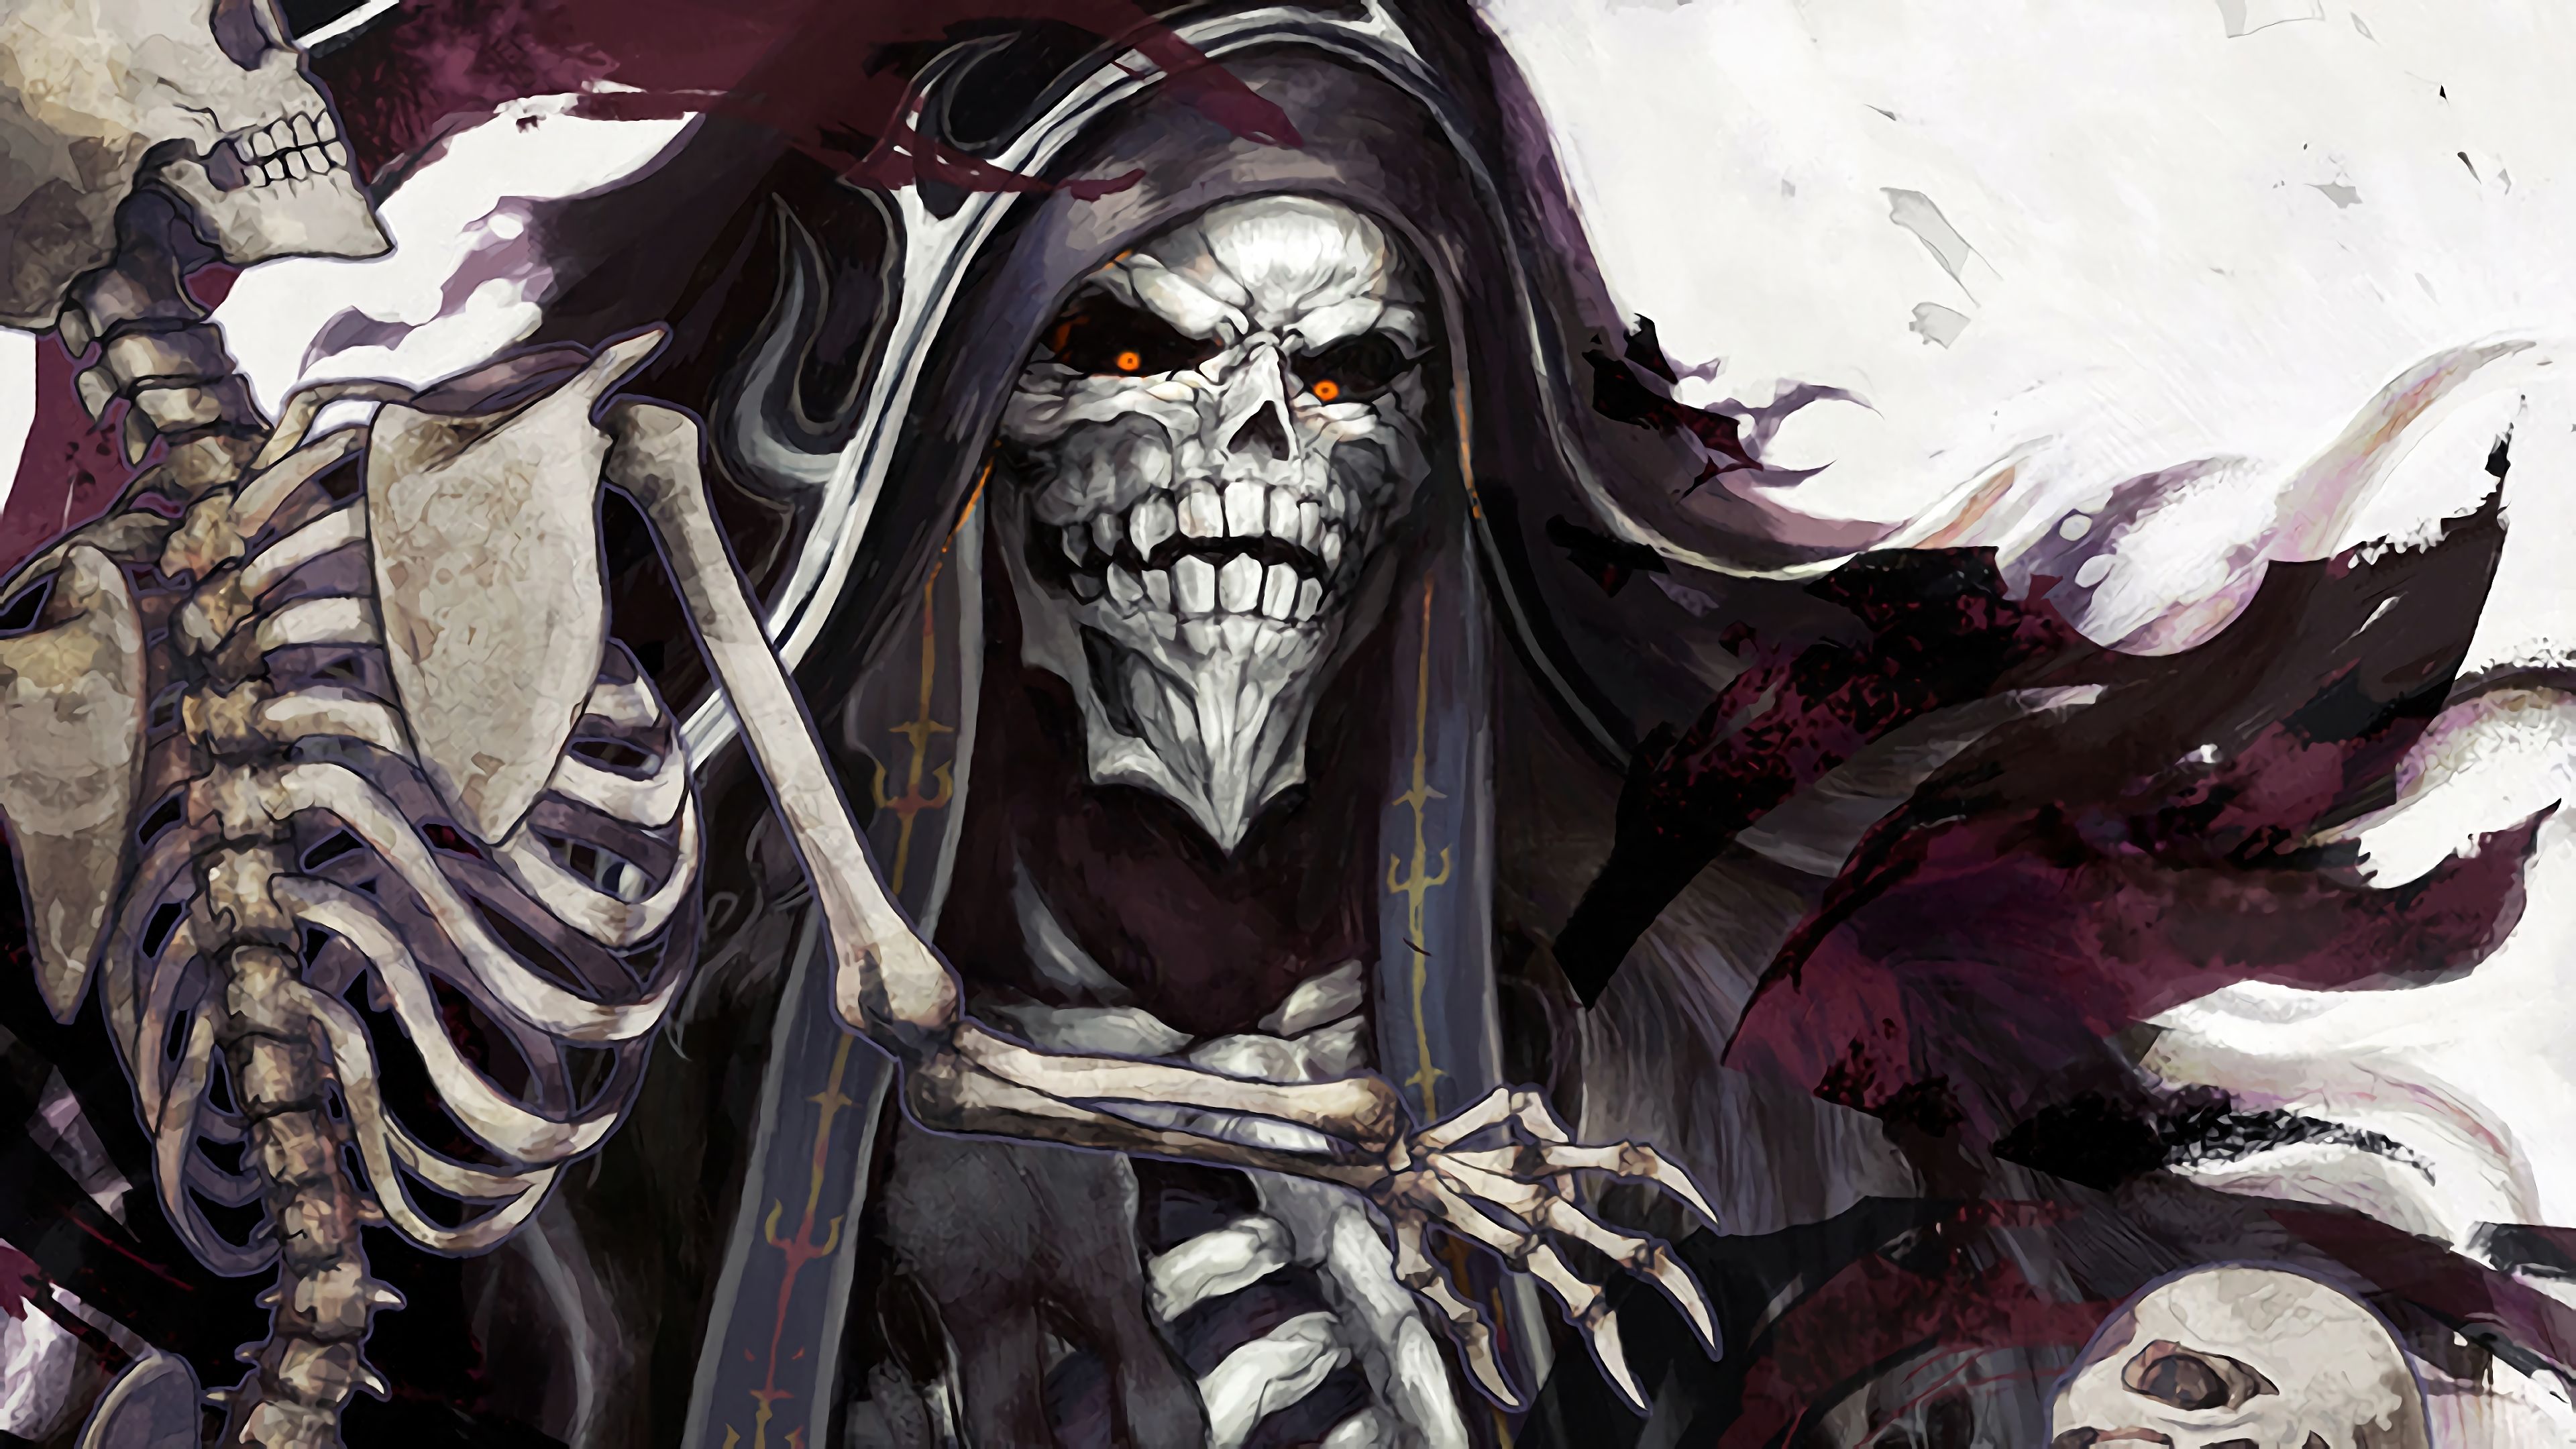 Ainz Ooal Gown Overlord 4K.